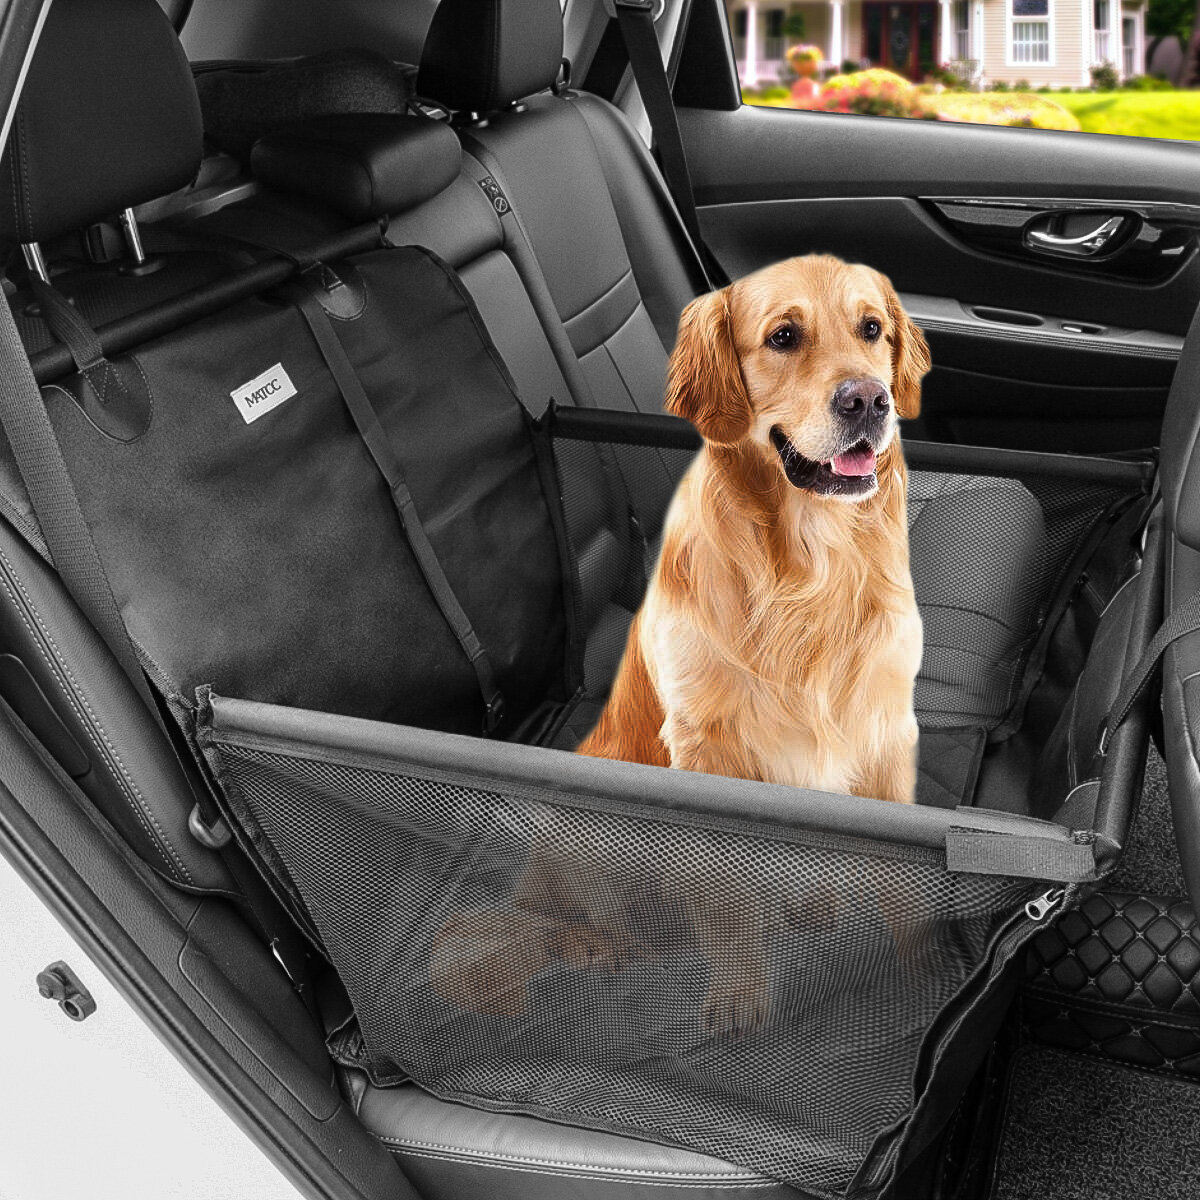 MATCC Car Rear Seat Covers Pet Mat Carrier Protector for Dogs with Seat Belt Waterproof Nonslip Dog Accessories Basket H